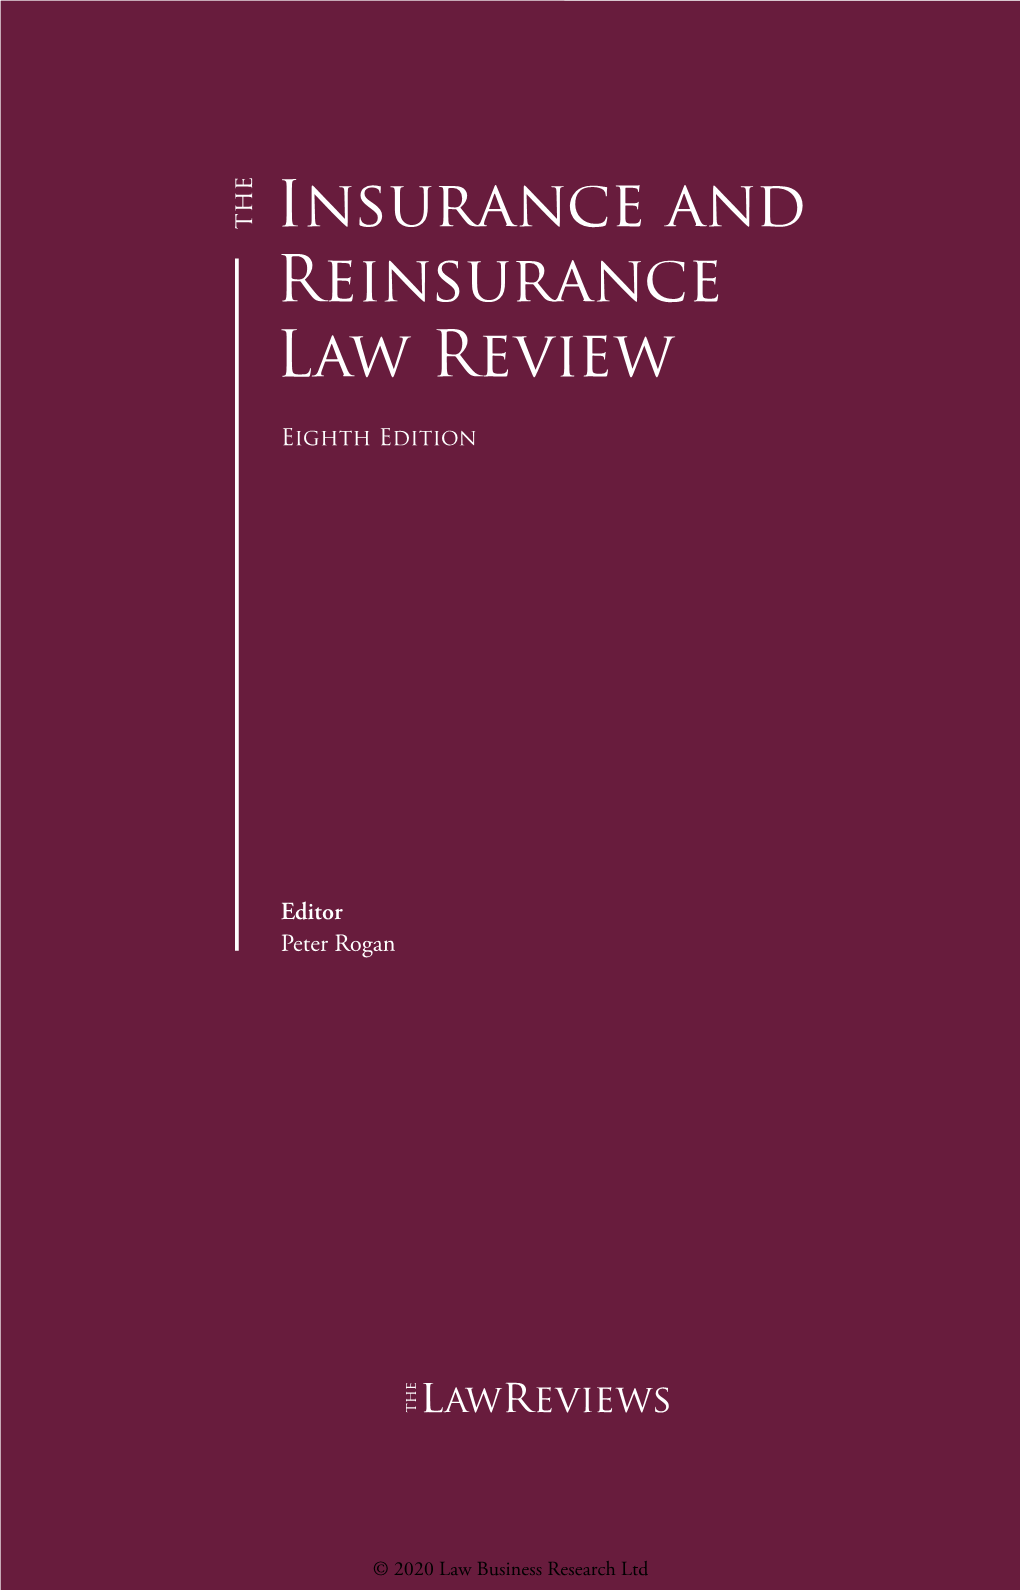 Insurance and Reinsurance Law Review